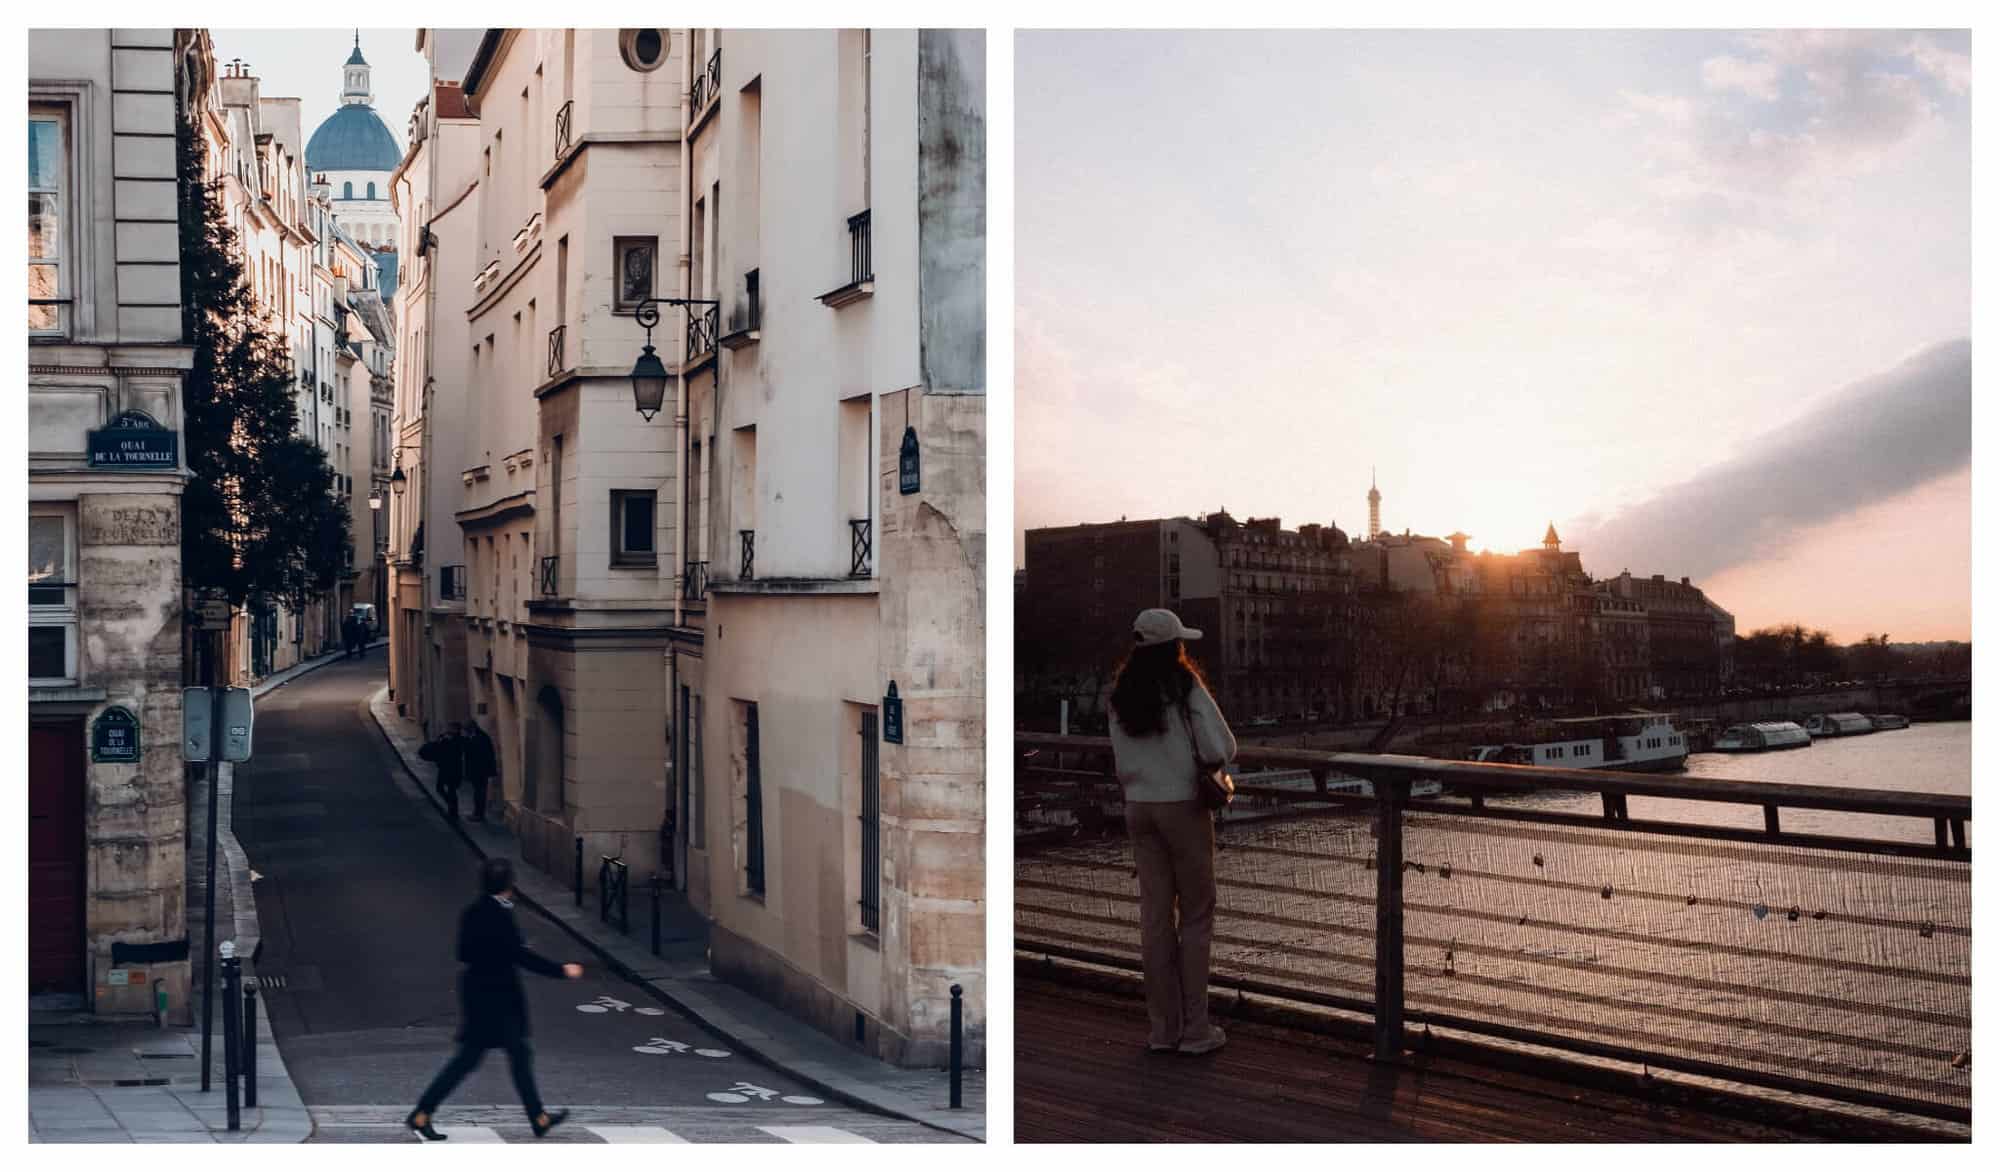 Left: A man walks through a crosswalk and looks down the cross street in Montmartre, Paris. Right: A woman with a white baseball hat watches the boats on the Seine go by at sunset.